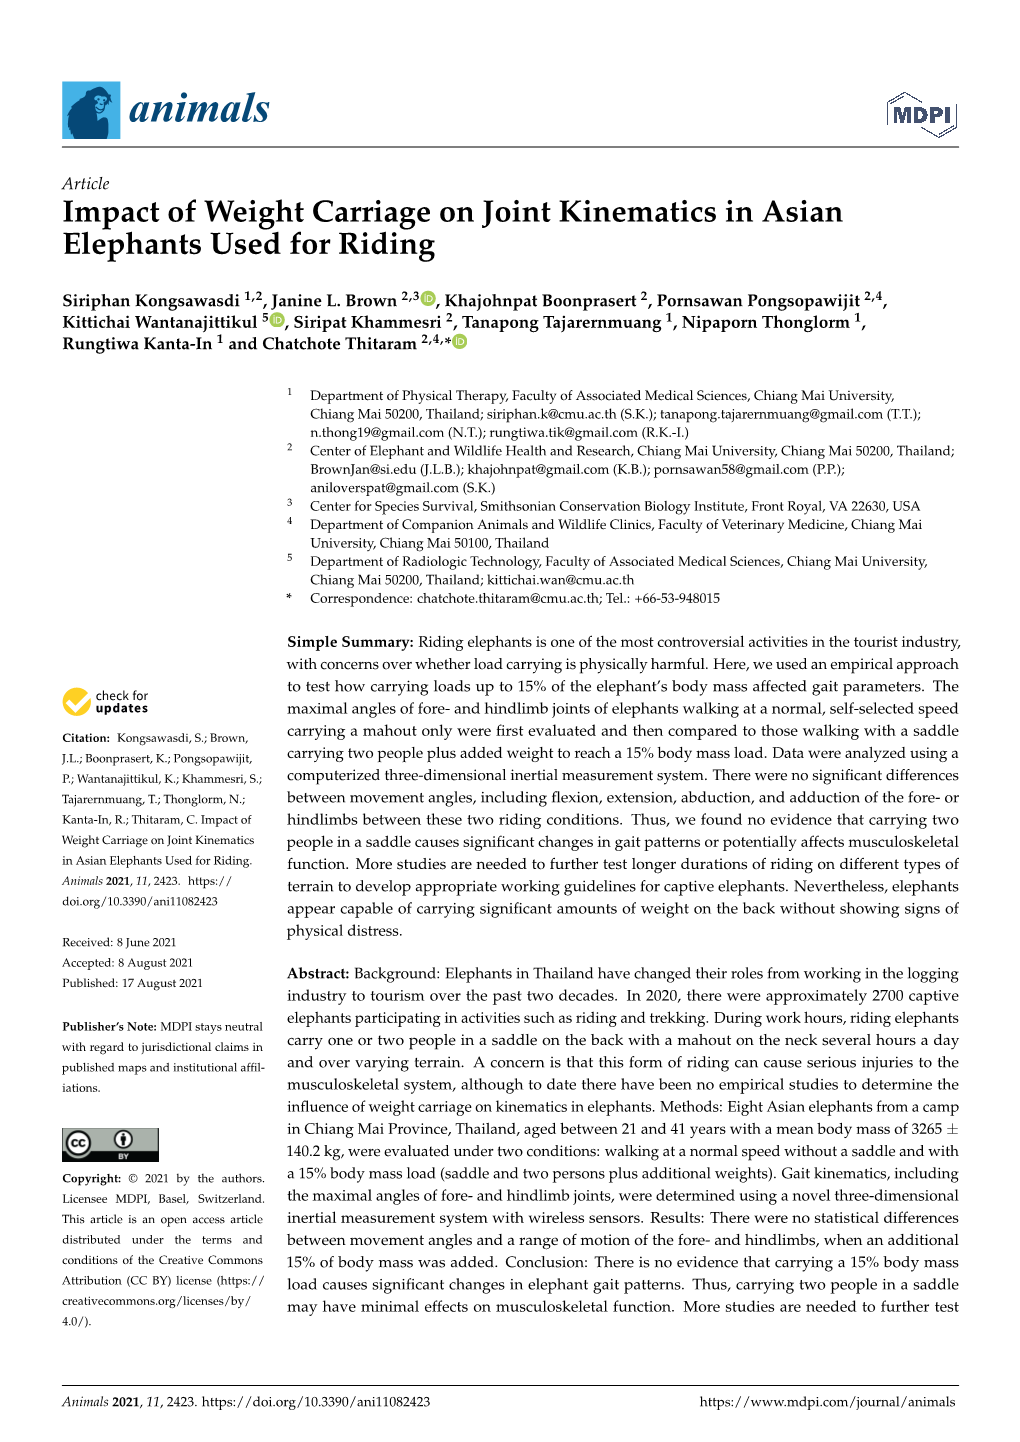 Impact of Weight Carriage on Joint Kinematics in Asian Elephants Used for Riding